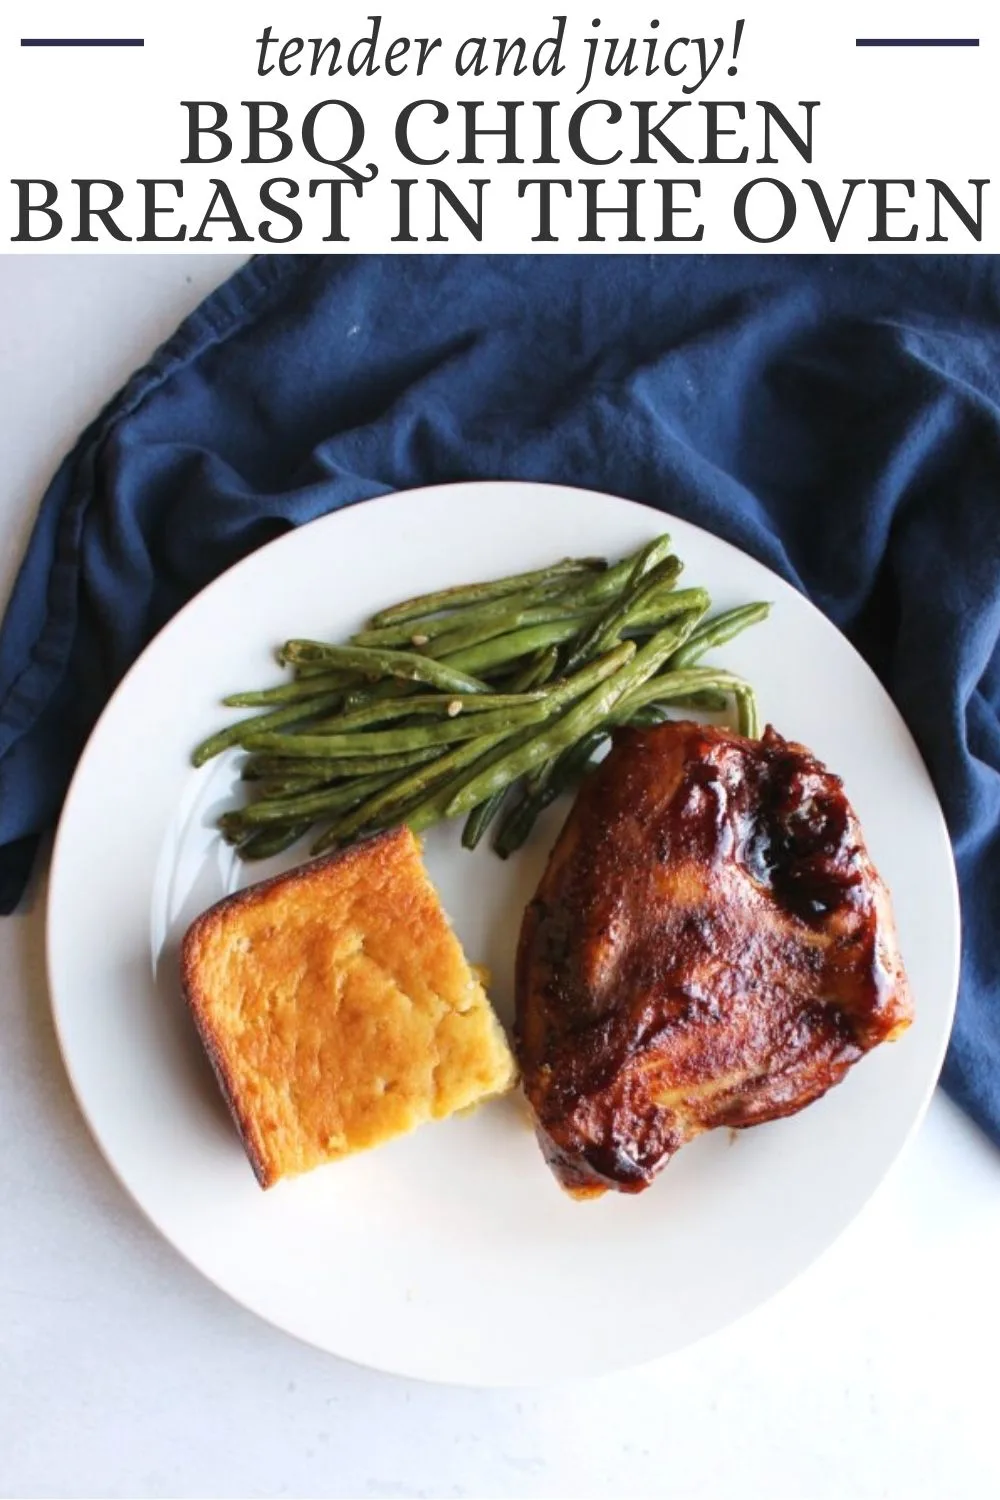 Sometimes you get a hankering for BBQ chicken but standing over the grill isn’t possible. That’s when you break out this recipe for baked BBQ chicken, it is the best way to do it indoors!